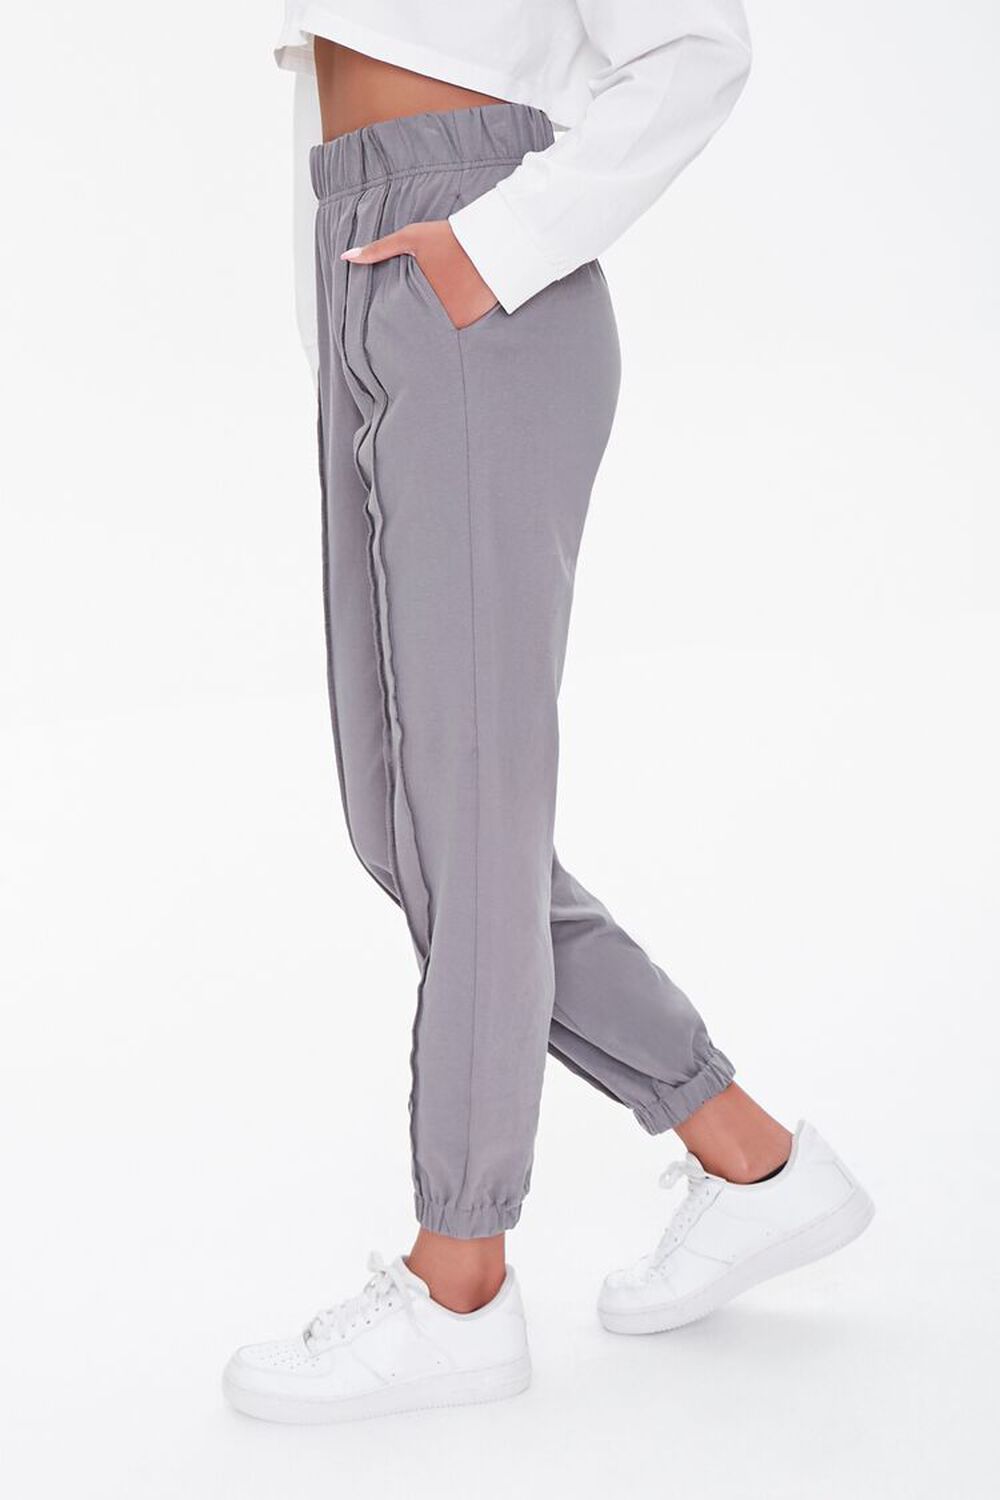 CHARCOAL High-Rise Topstitch Joggers, image 3